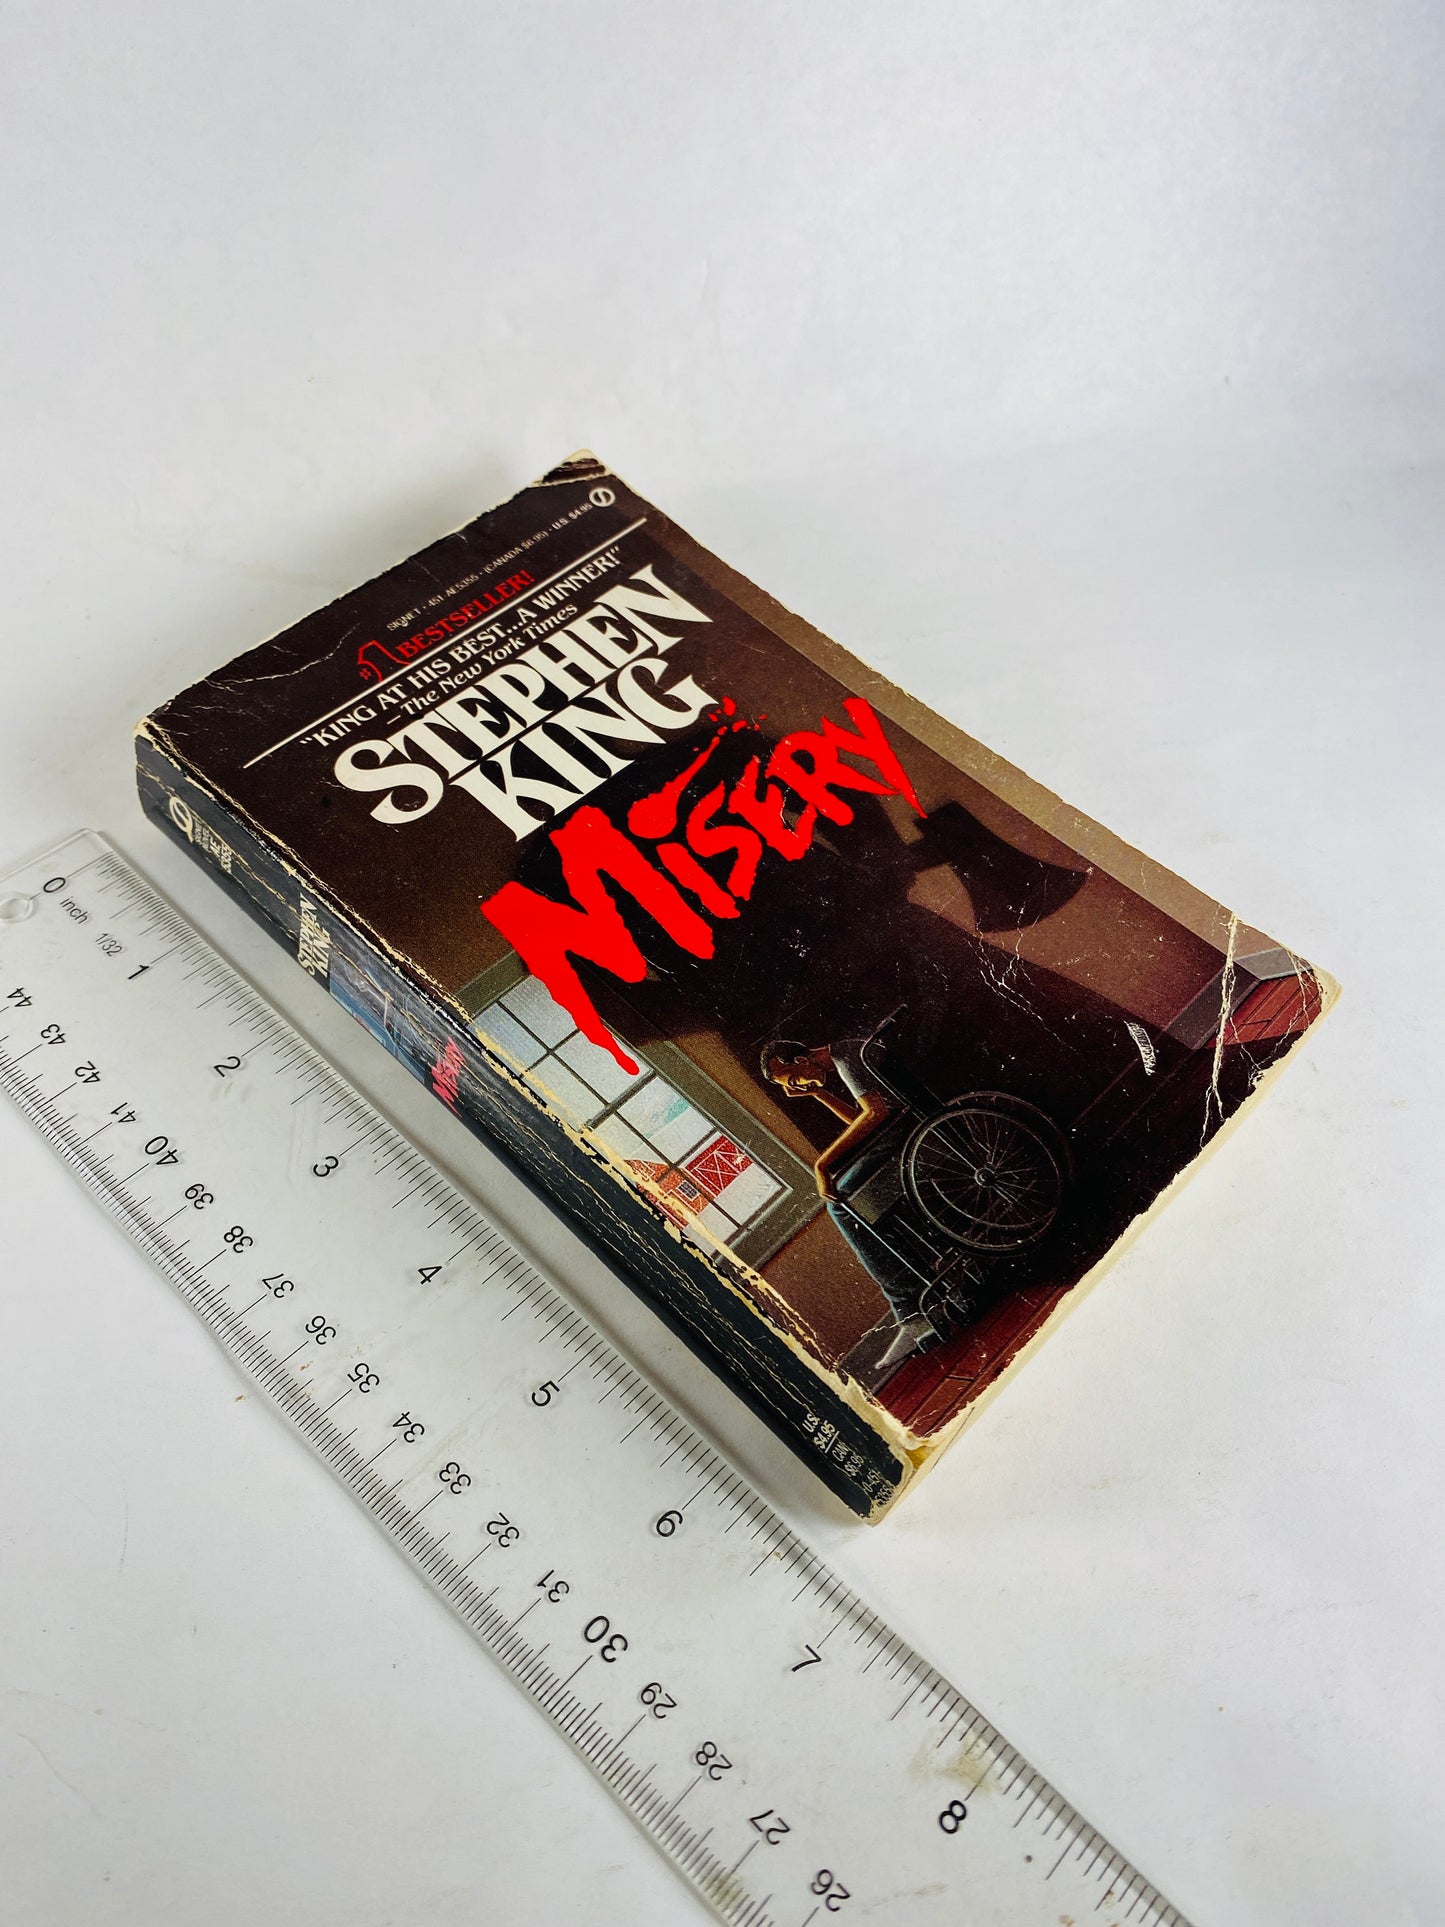 Misery vintage paperback book by Stephen King circa 1988 Horror Collectible home Bookshelf decor unique Valentine's gift him her